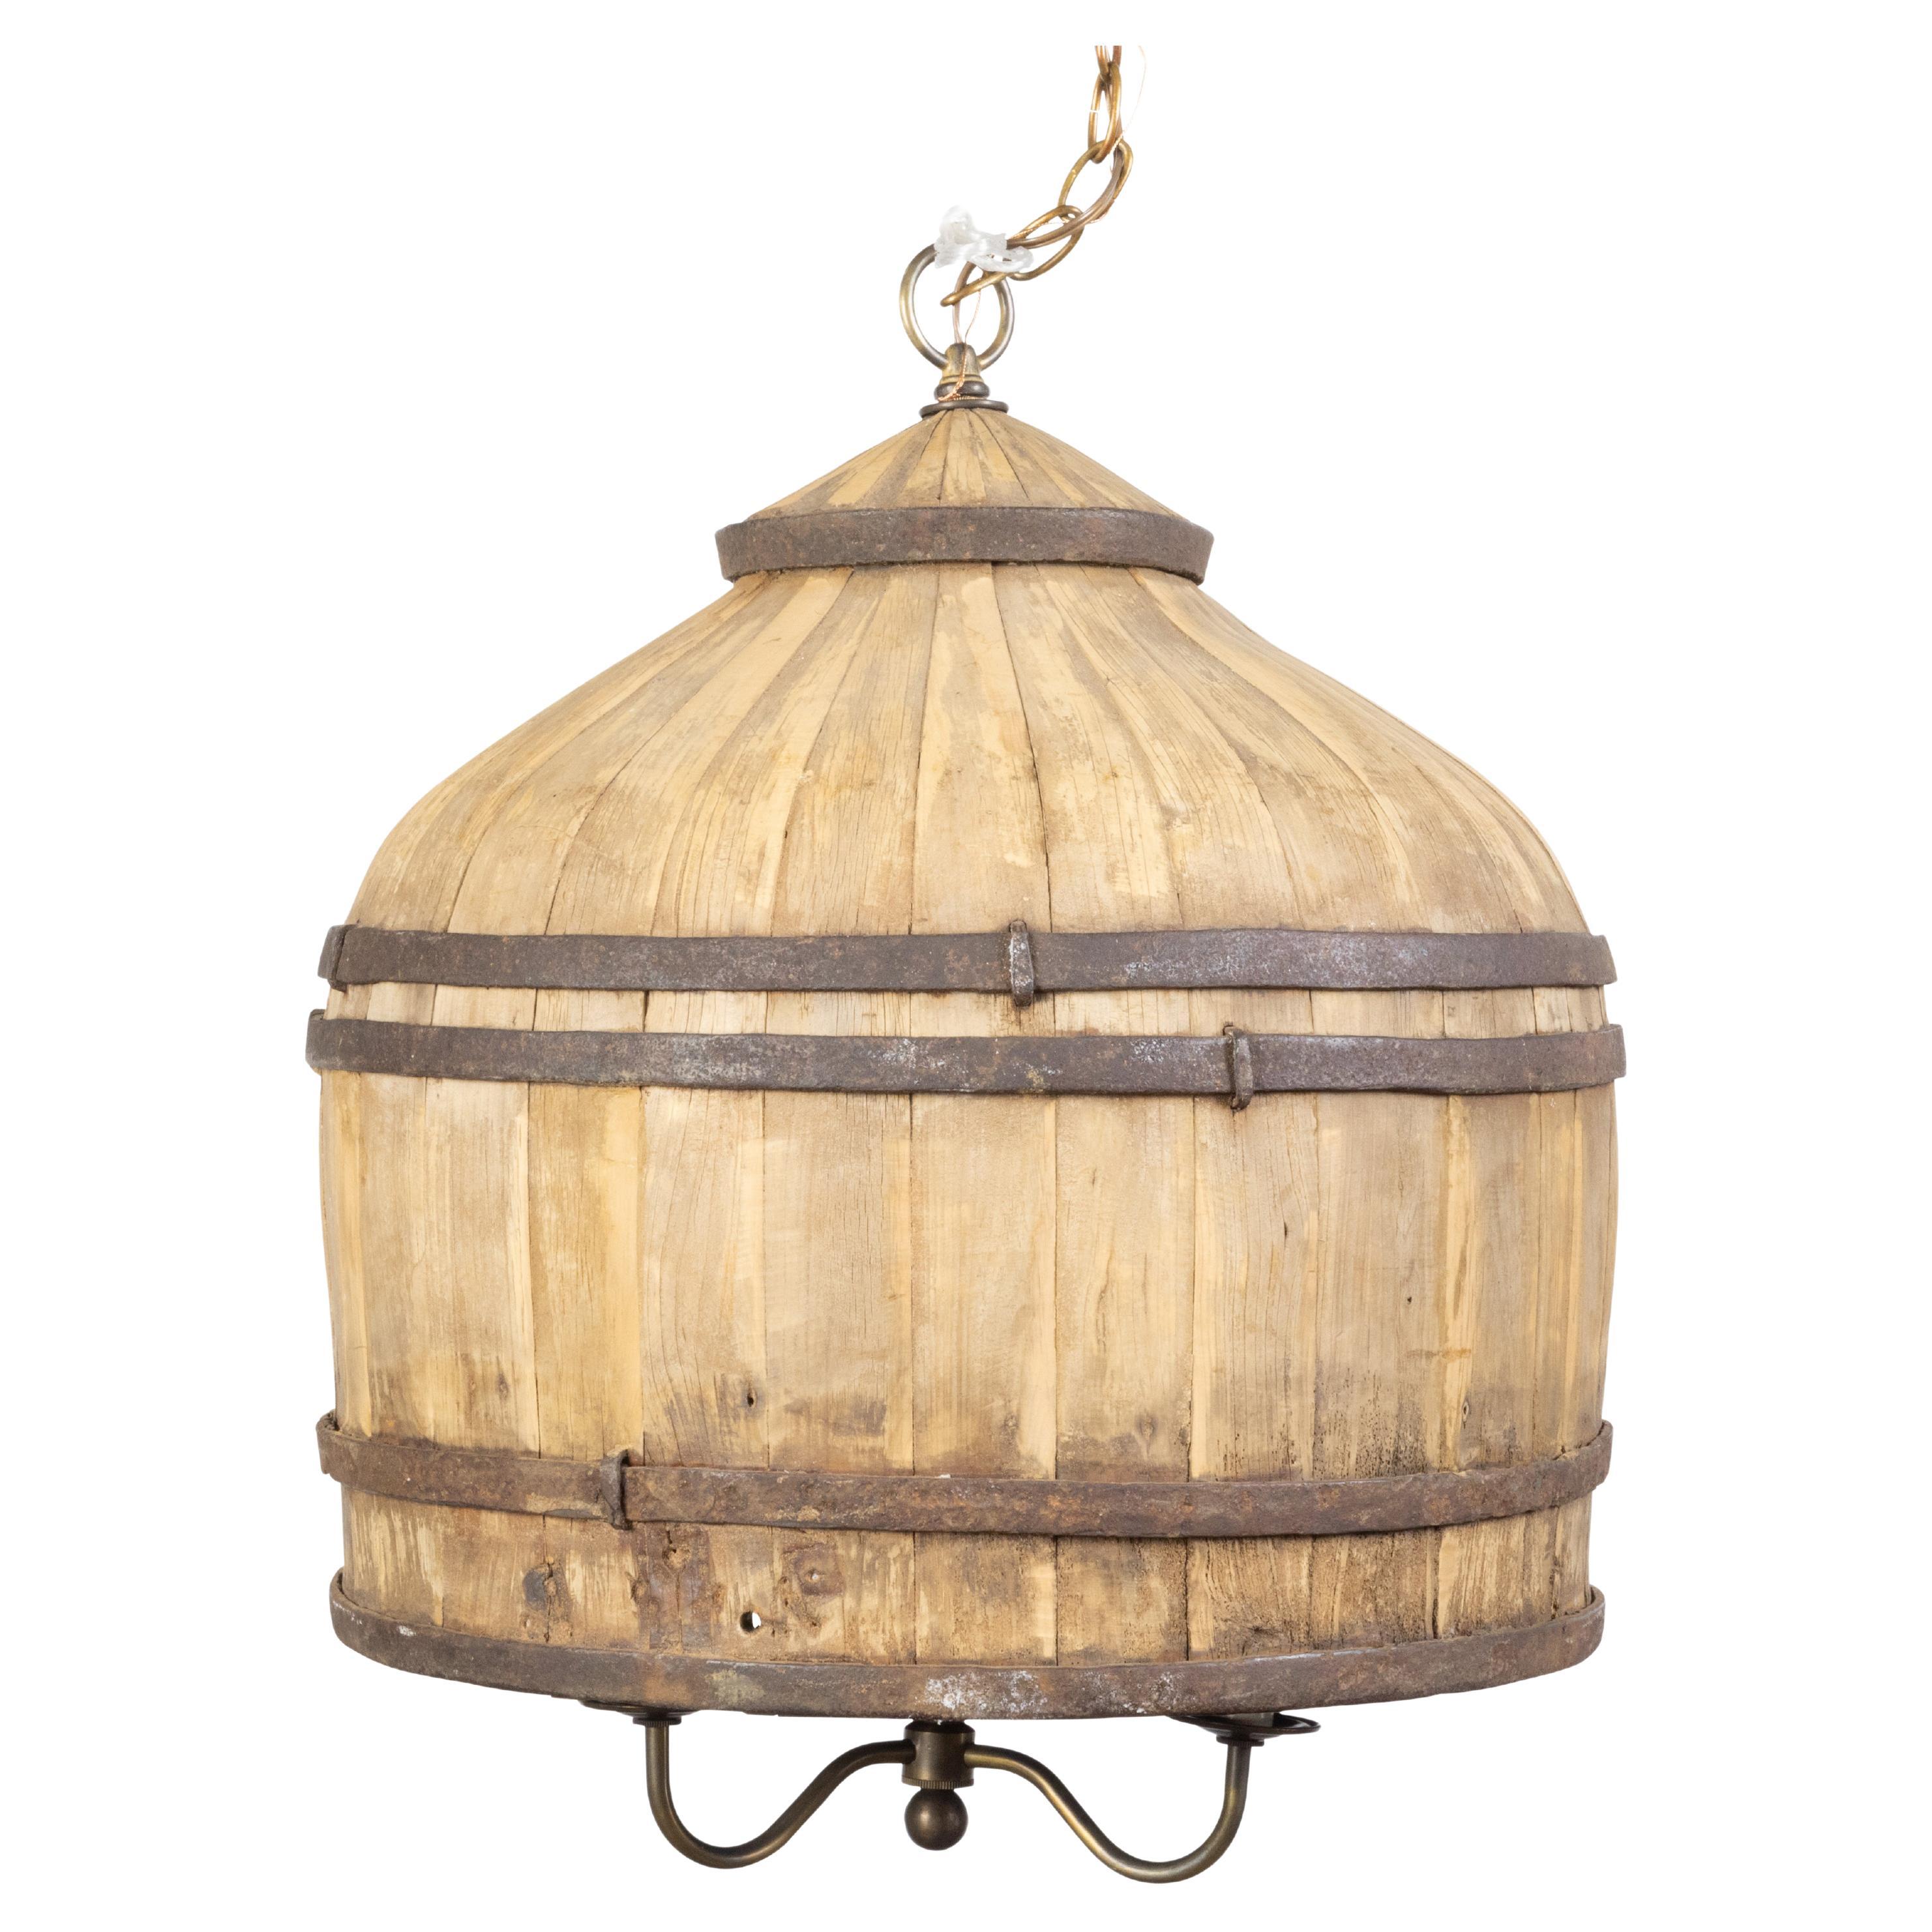 Rustic English Vintage Wooden Barrel Light Fixture with Three Scrolling Arms For Sale